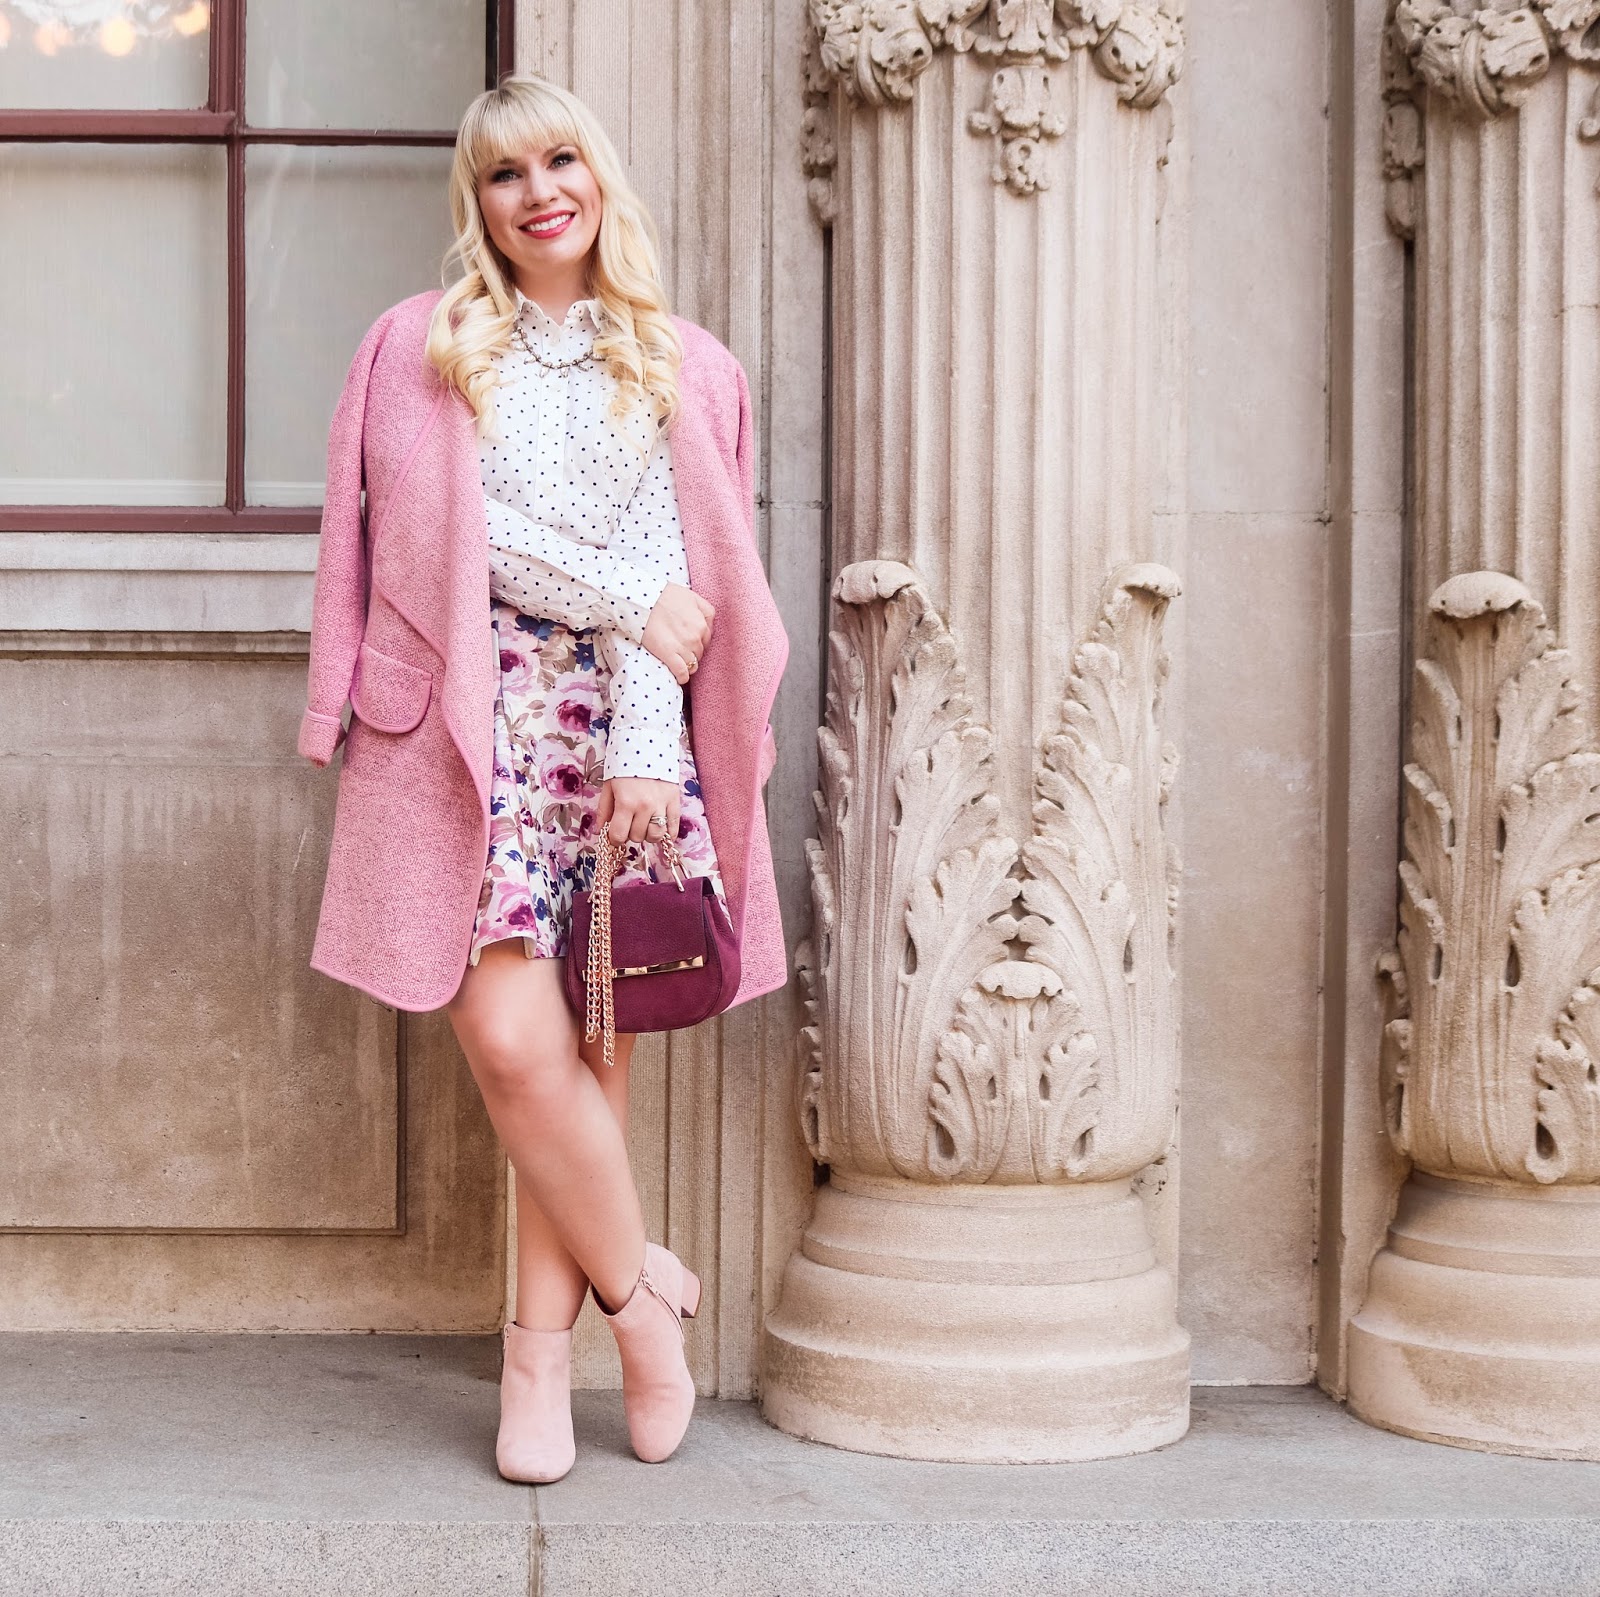 Shoes of Prey Review by popular California style blogger Lizzie in Lace